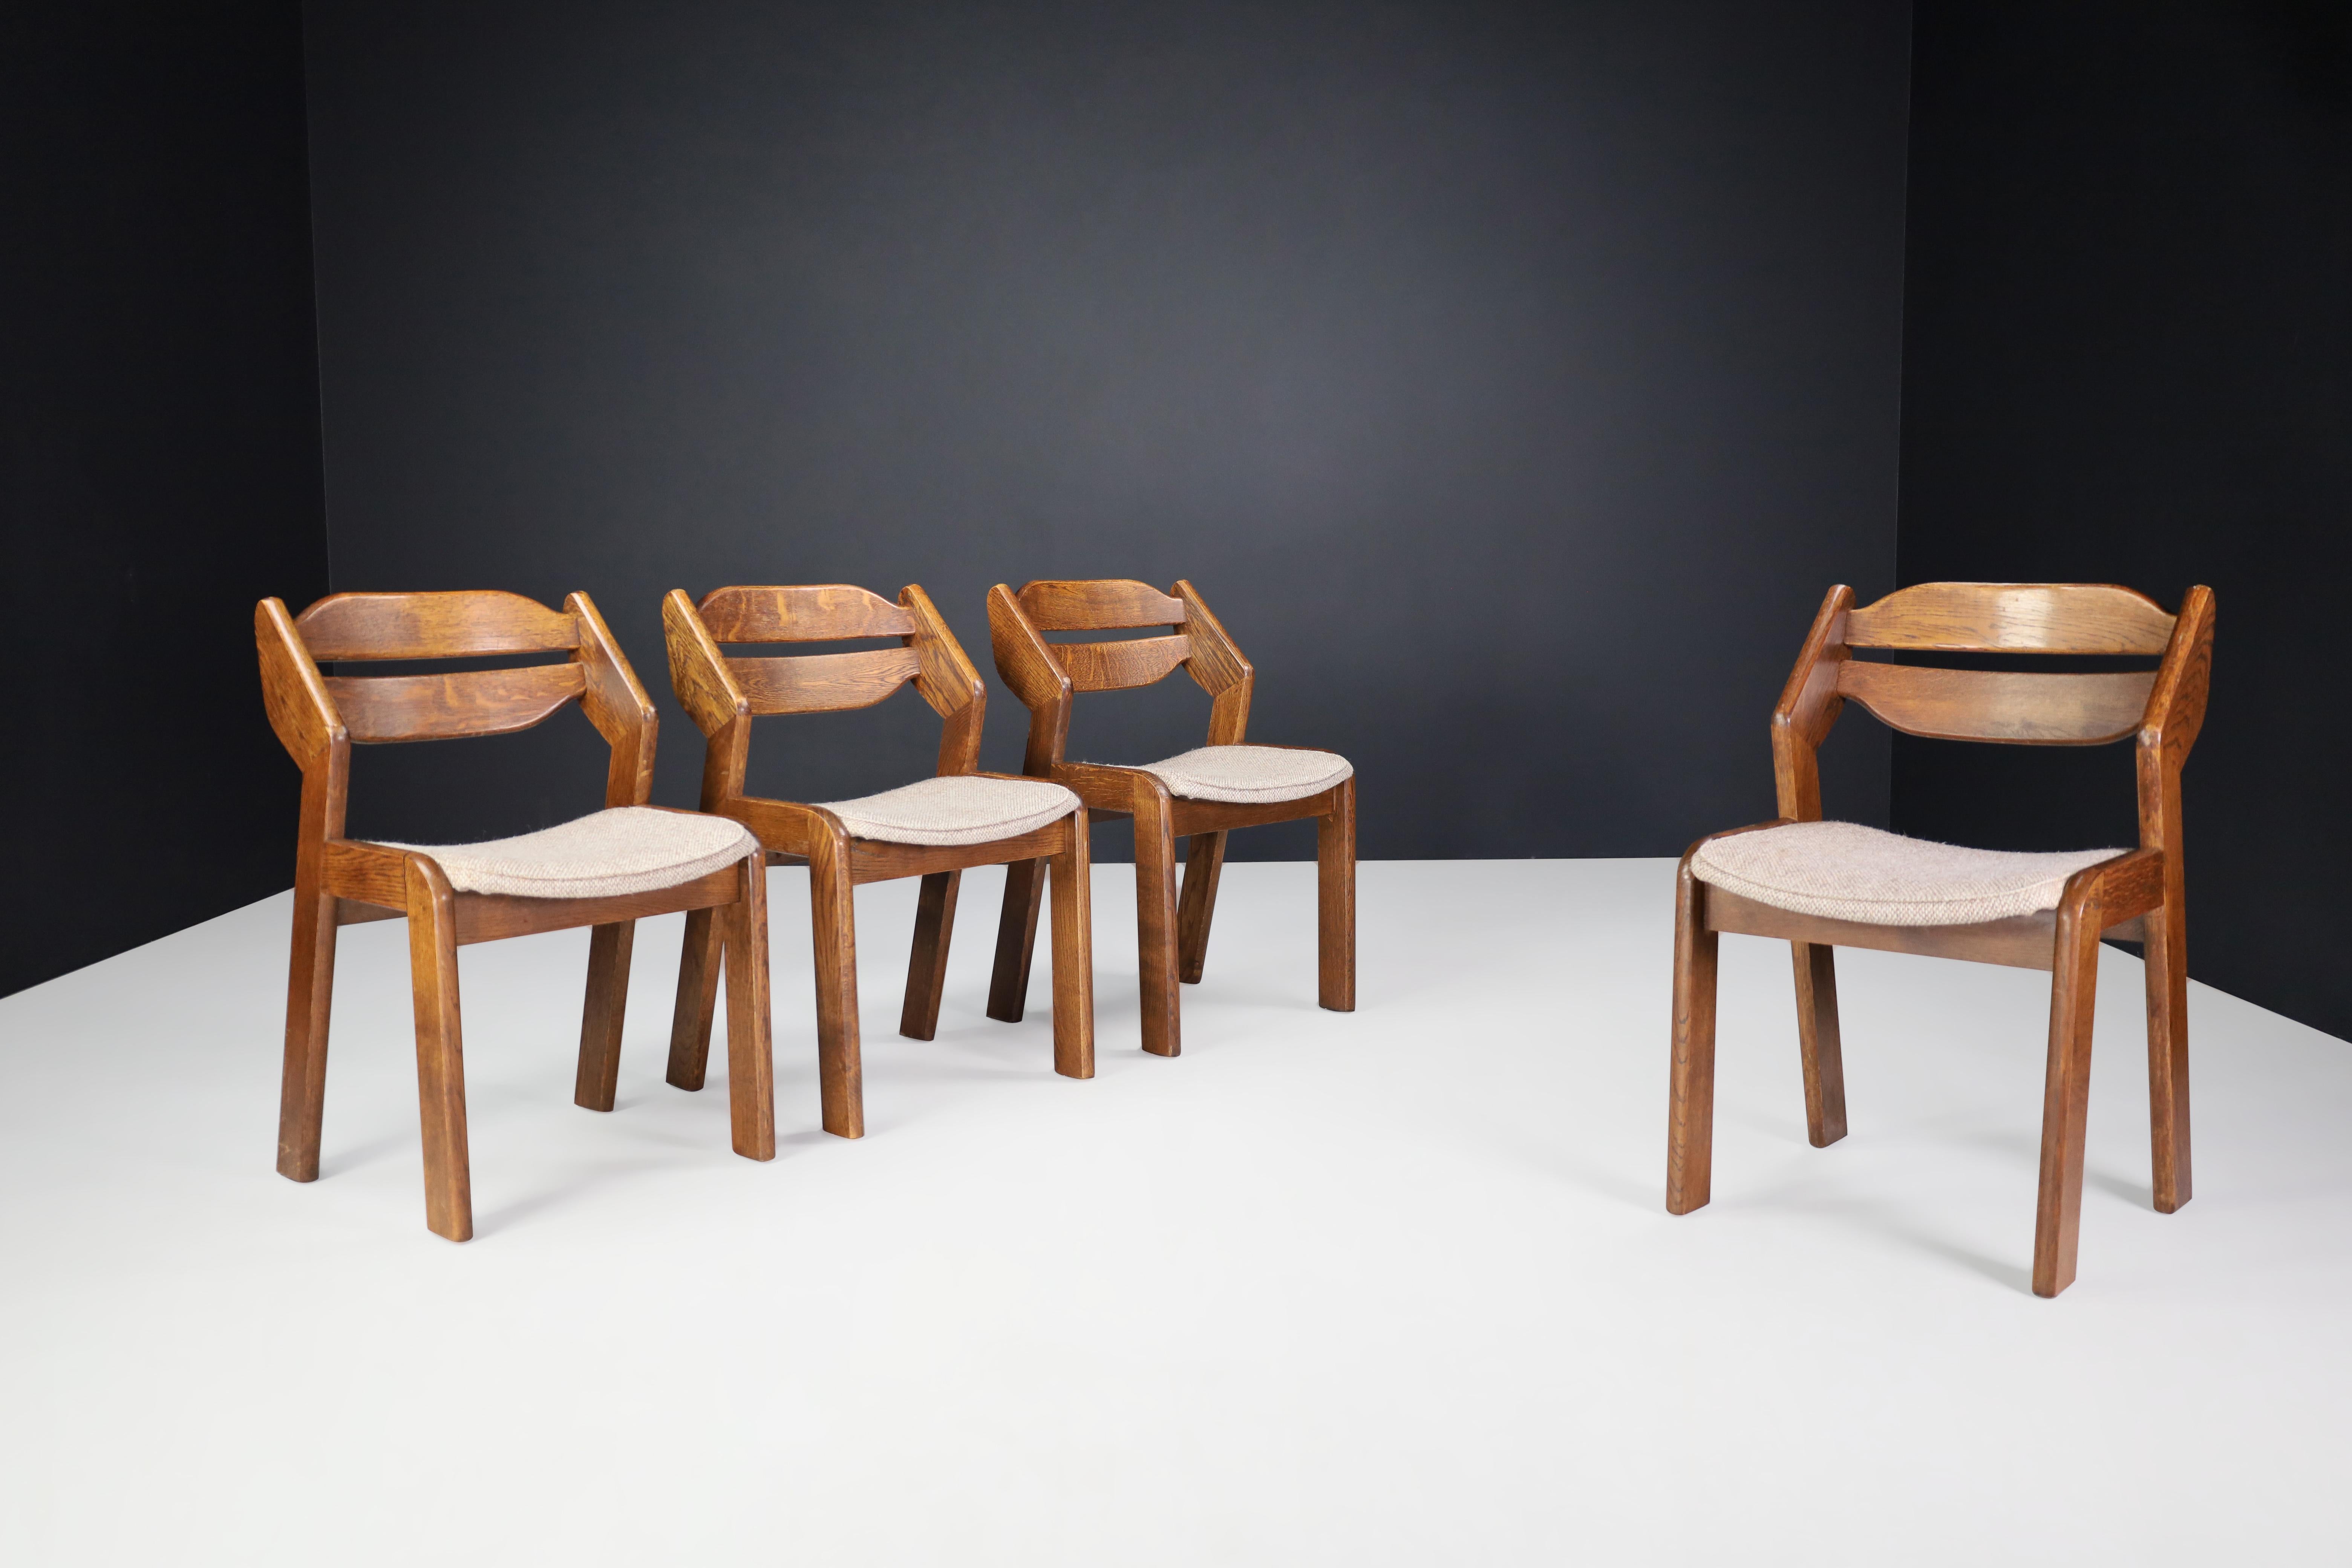 Sculptural oak and fabric dining chairs, France, 1960s

Set of four sculptural oak and fabric dining chairs, France, 1960s. These chairs are made entirely of wood and rush. They are in excellent original condition. The color of the wood is very